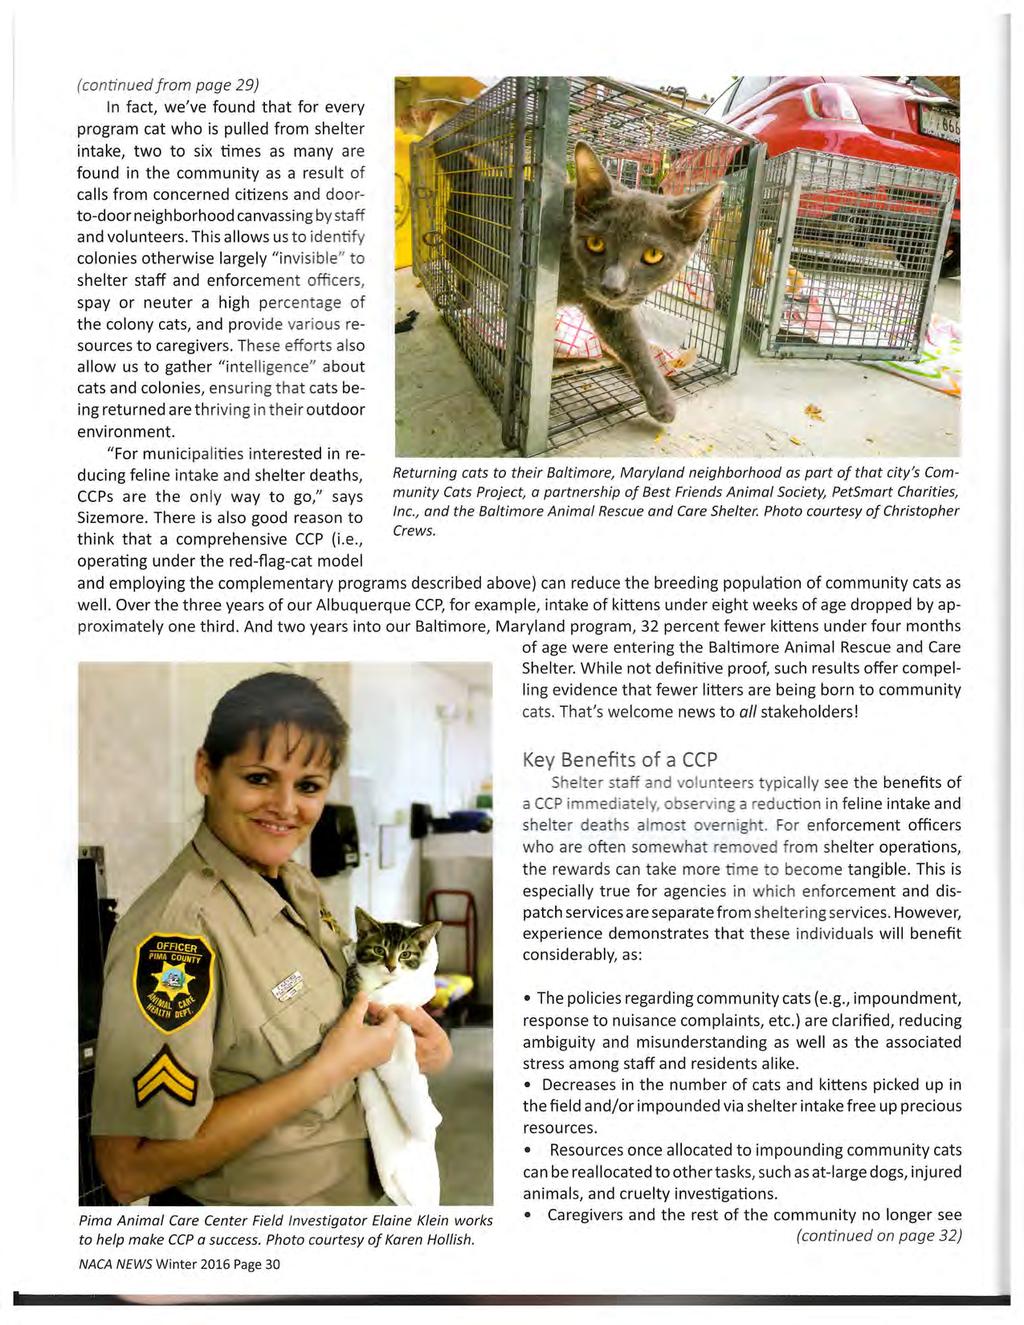 (continued f rom page 29) In fact, we've found that for every program cat who is pulled from shelter intake, two to six times as many are found in the community as a result of calls from concerned